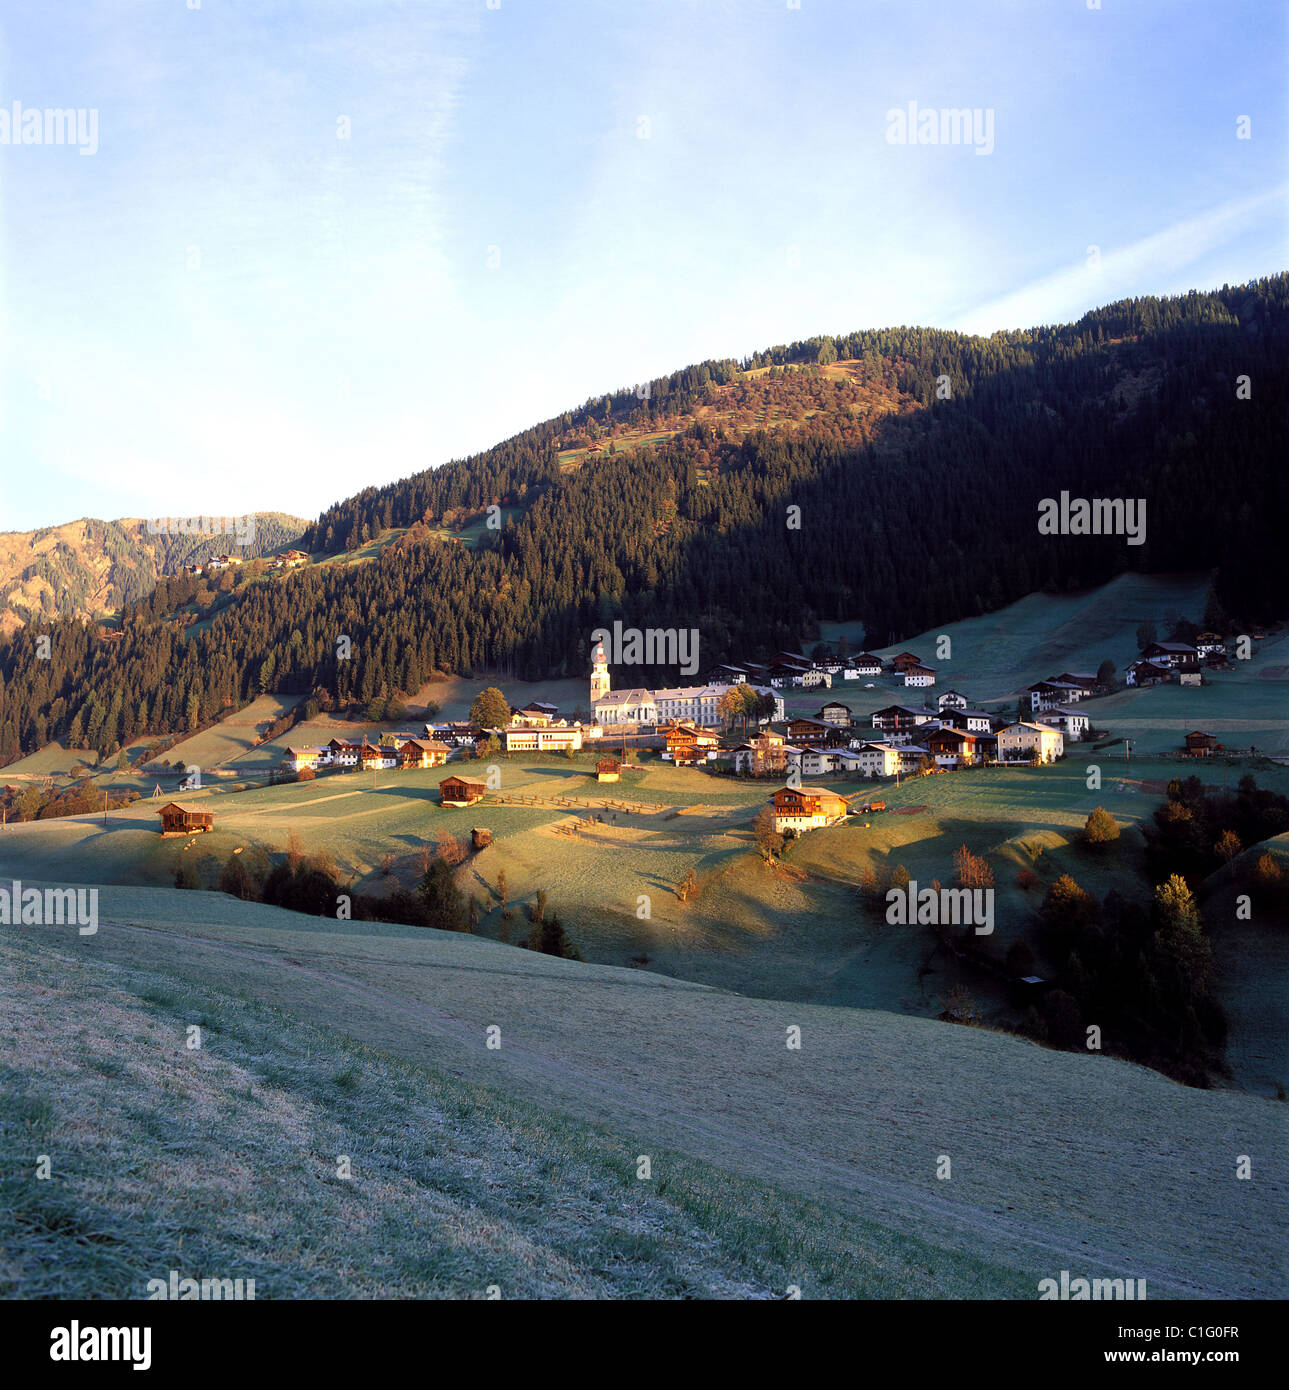 Autria, Tyrol, Lesachtal region, village and valley of Maria Luggau Stock Photo